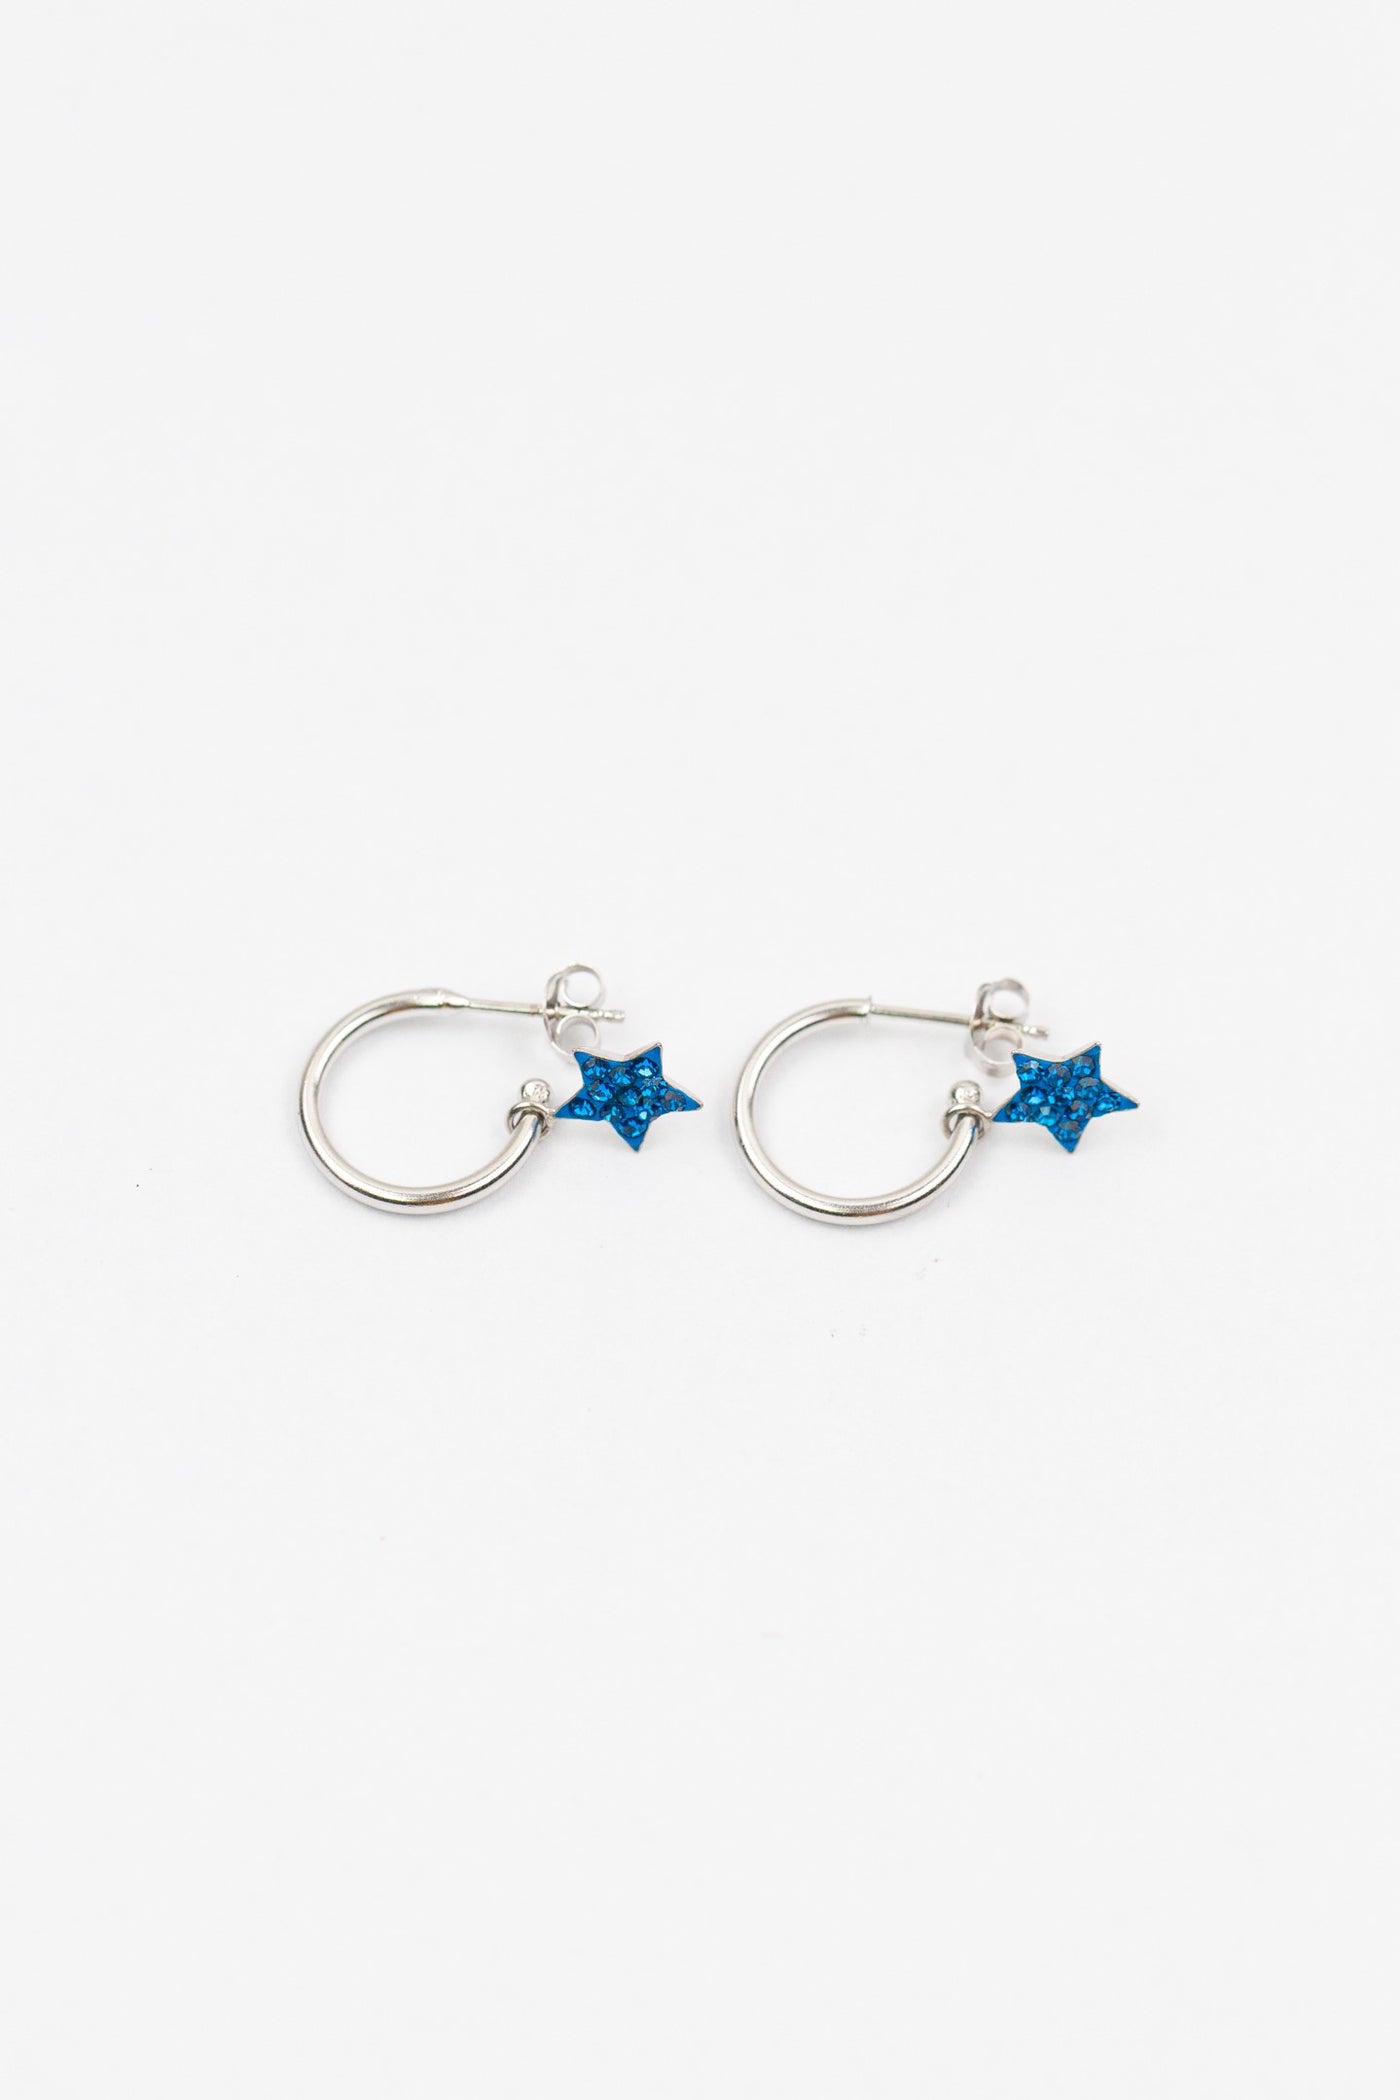 Silver Huggie Earrings with Crystal Star Charm in Capri Blue | Annie and Sisters